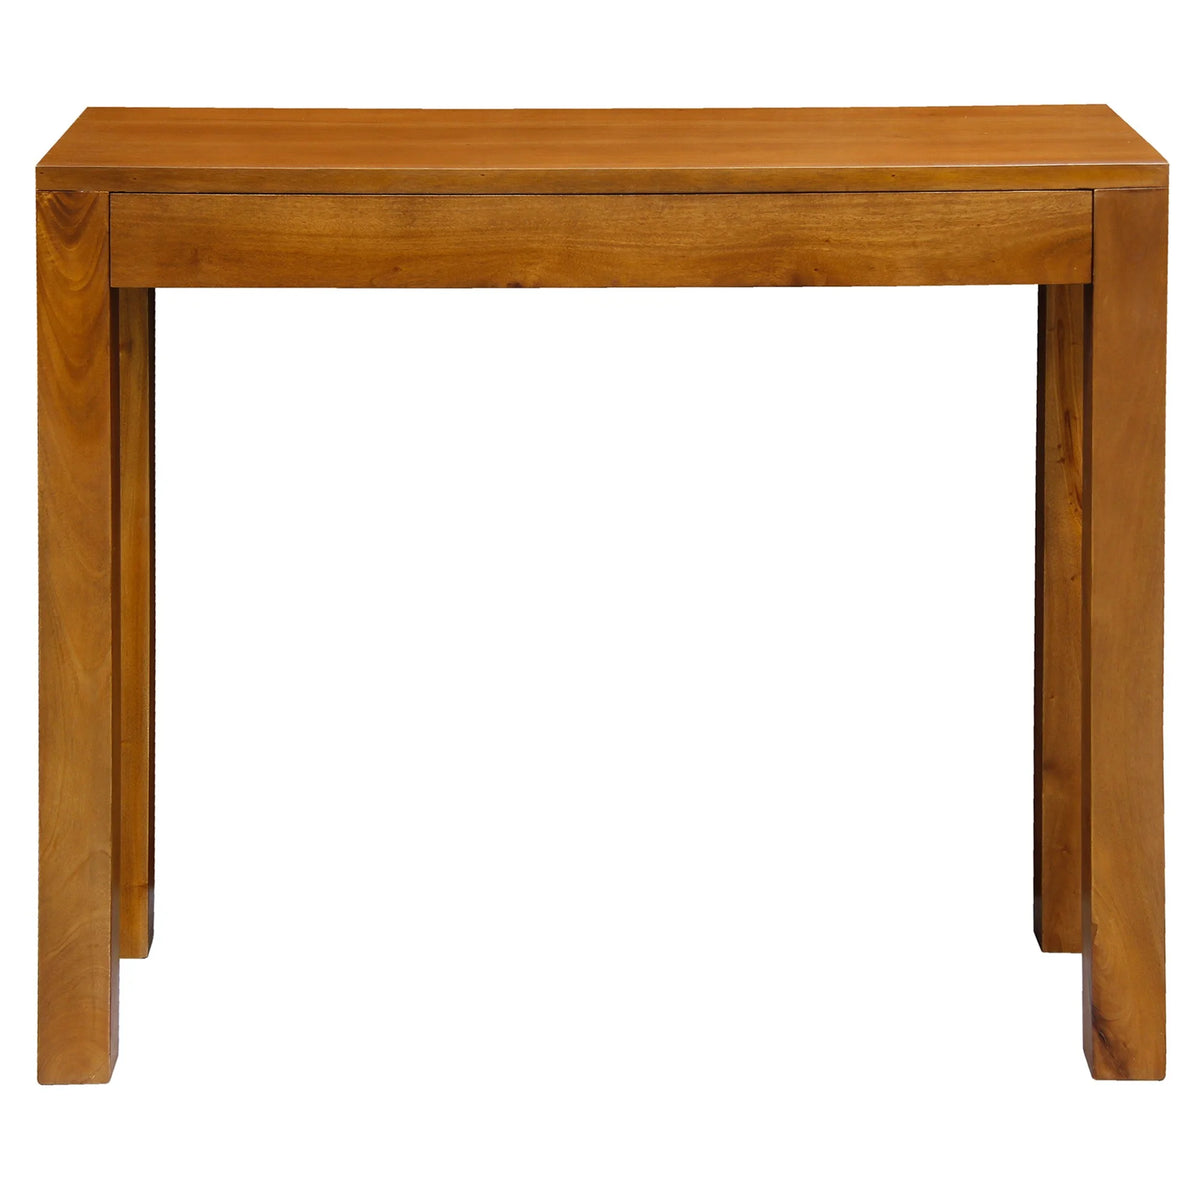 Amsterdam Timber 1 Drawer Console Table - Light Pecan - Notbrand